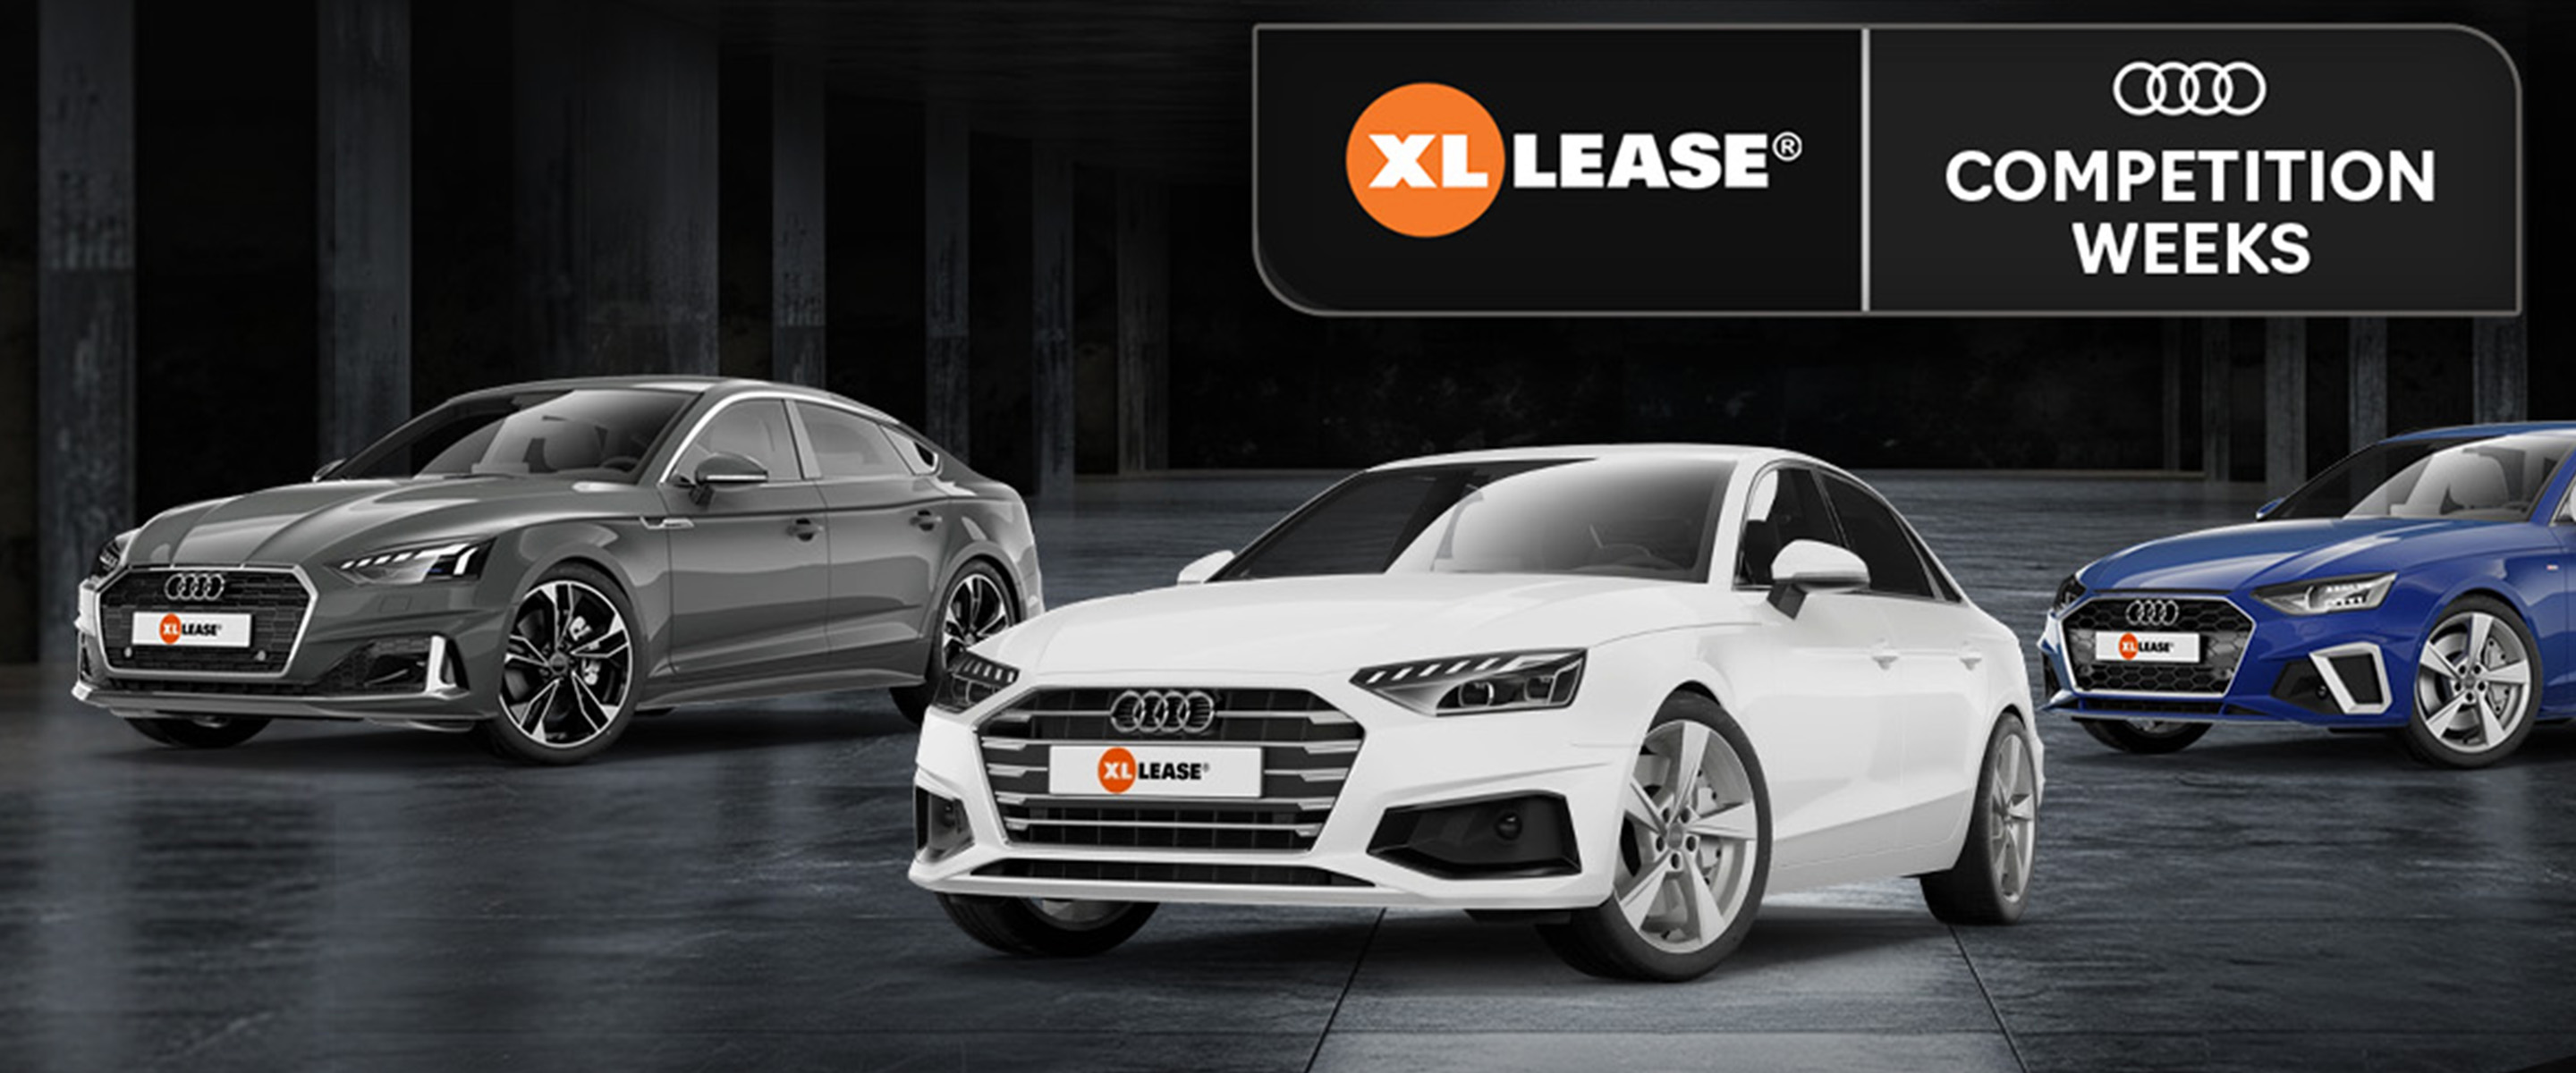 xllease competition weeks